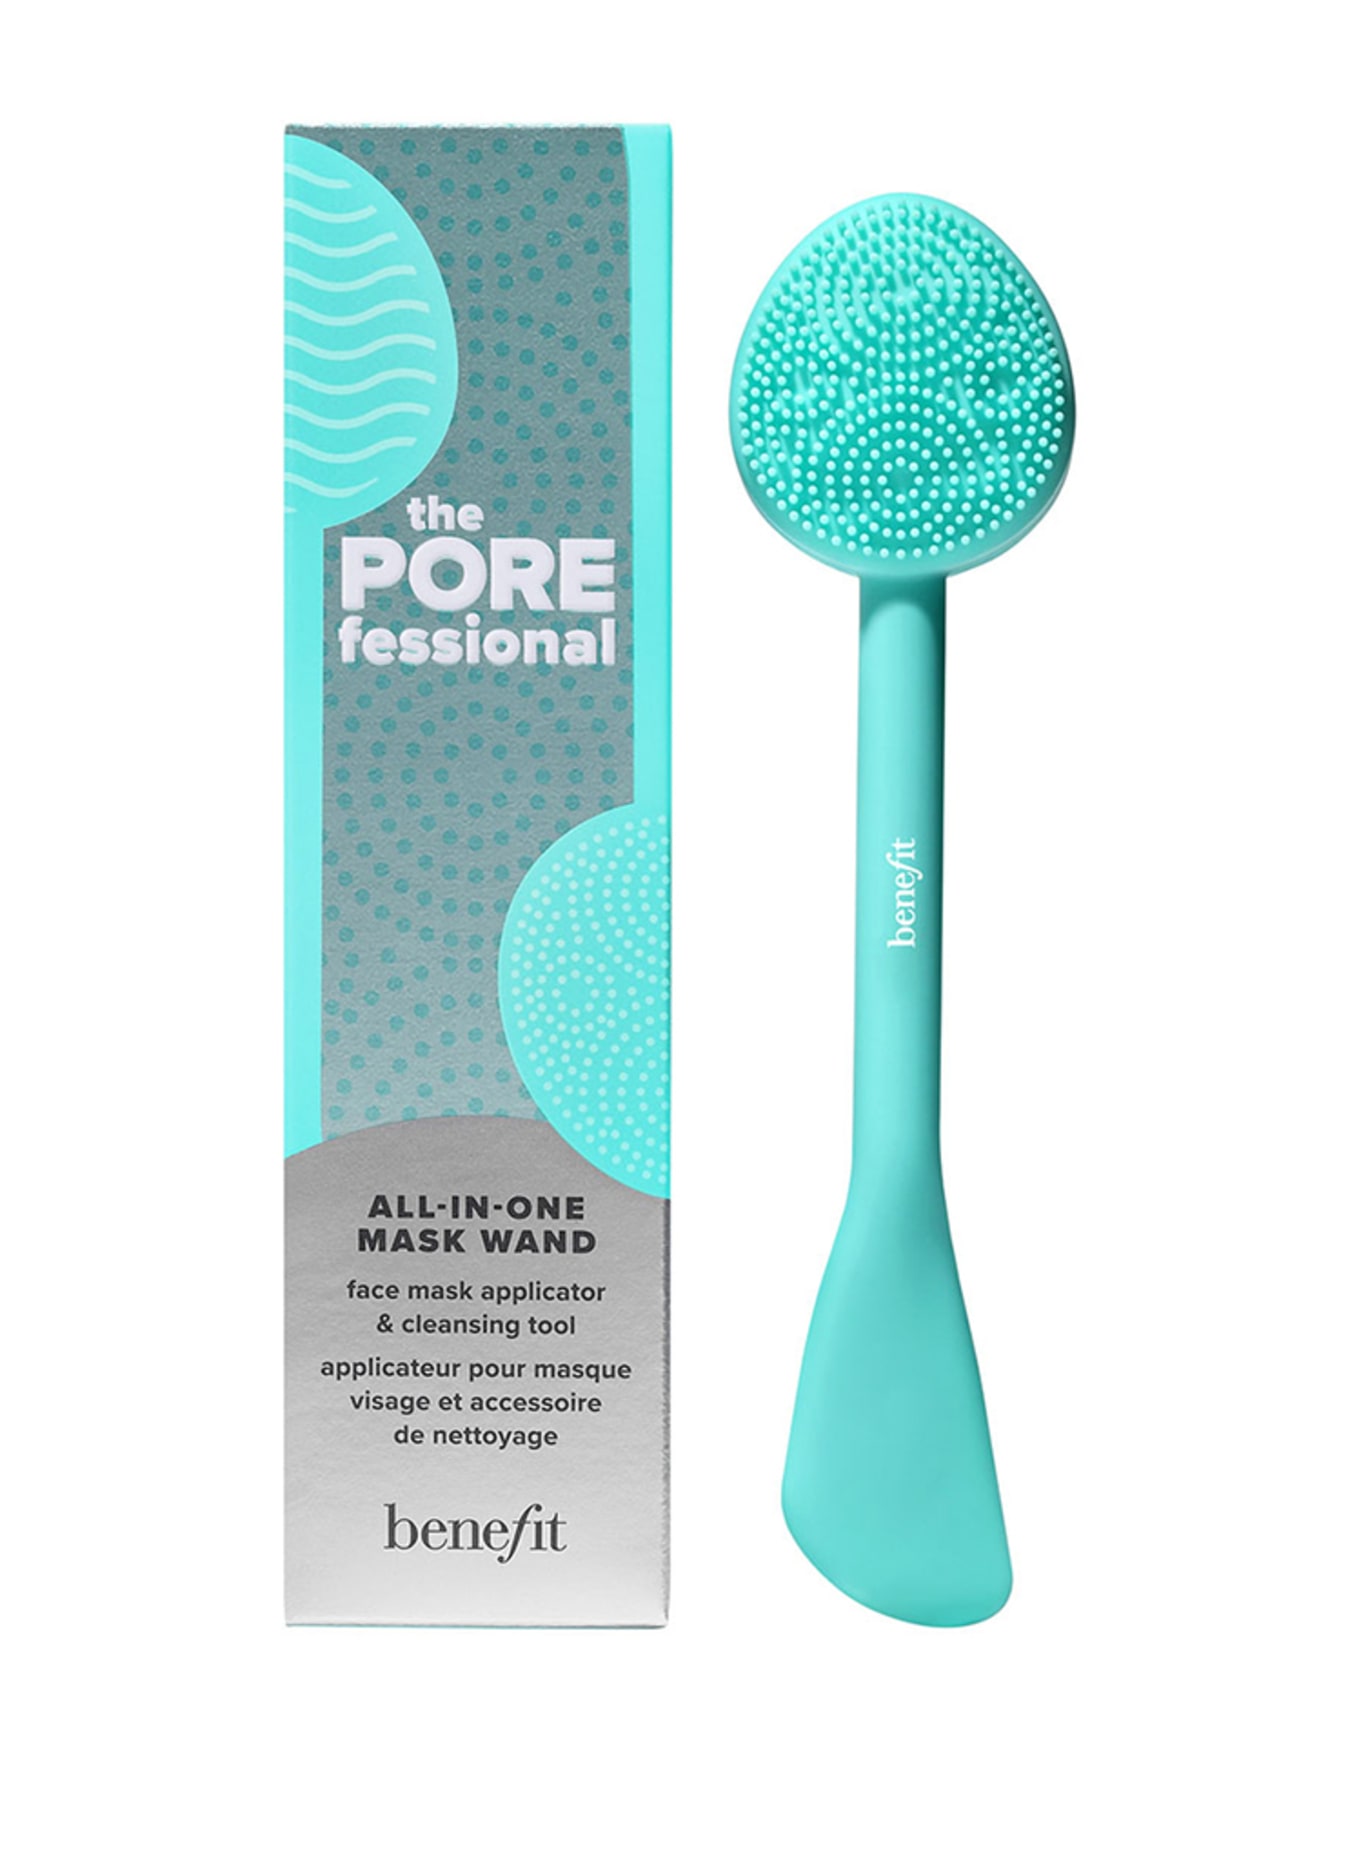 benefit THE POREFESSIONAL ALL-IN-ONE MASK WAND (Obrázek 2)